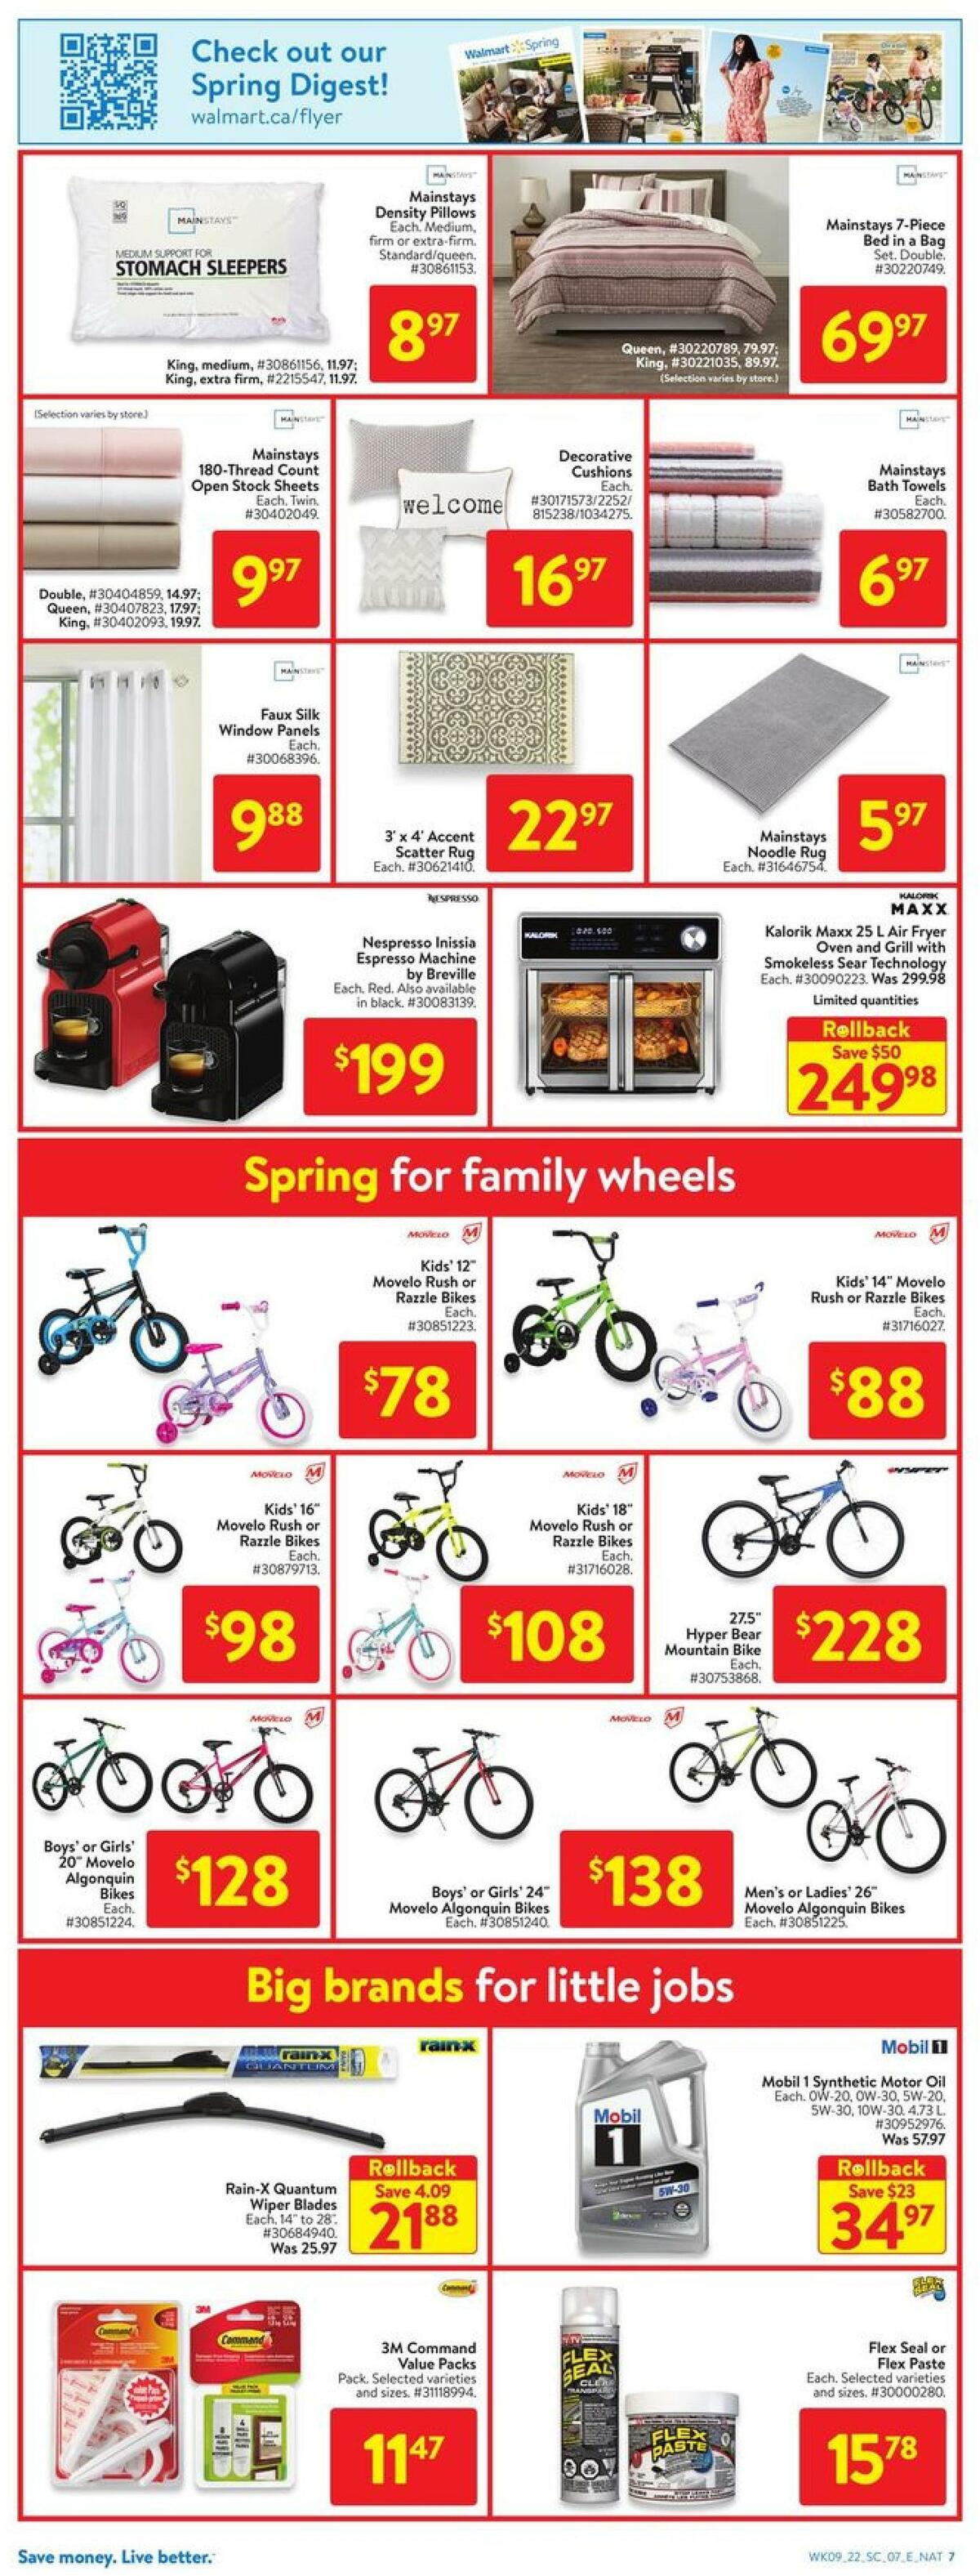 Walmart Flyer from March 24